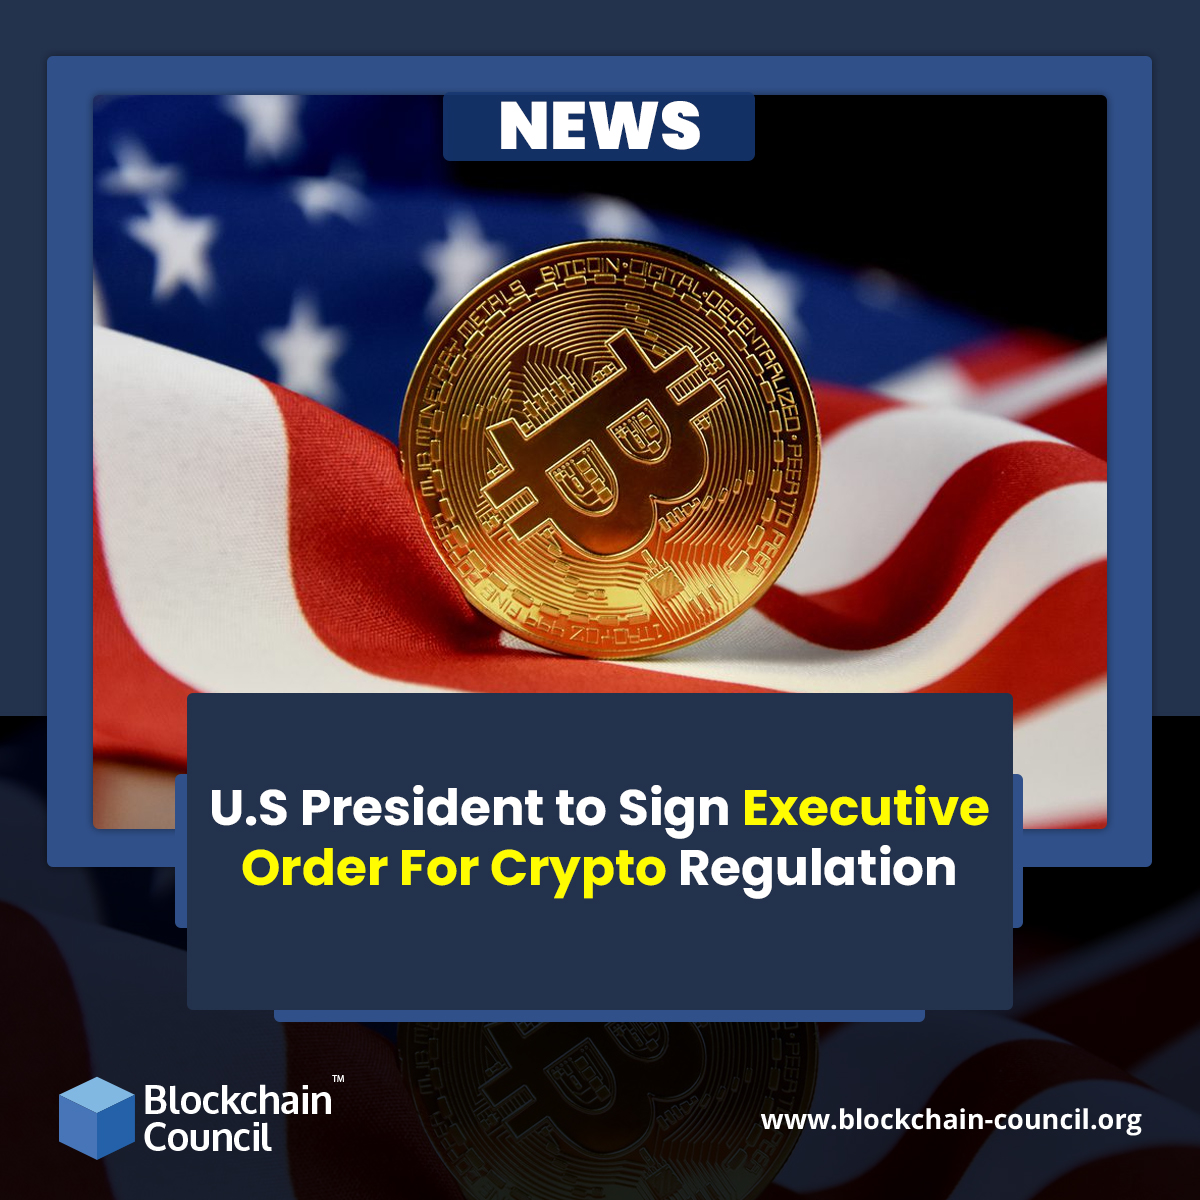 U.S President to Sign Executive Order For Crypto Regulation